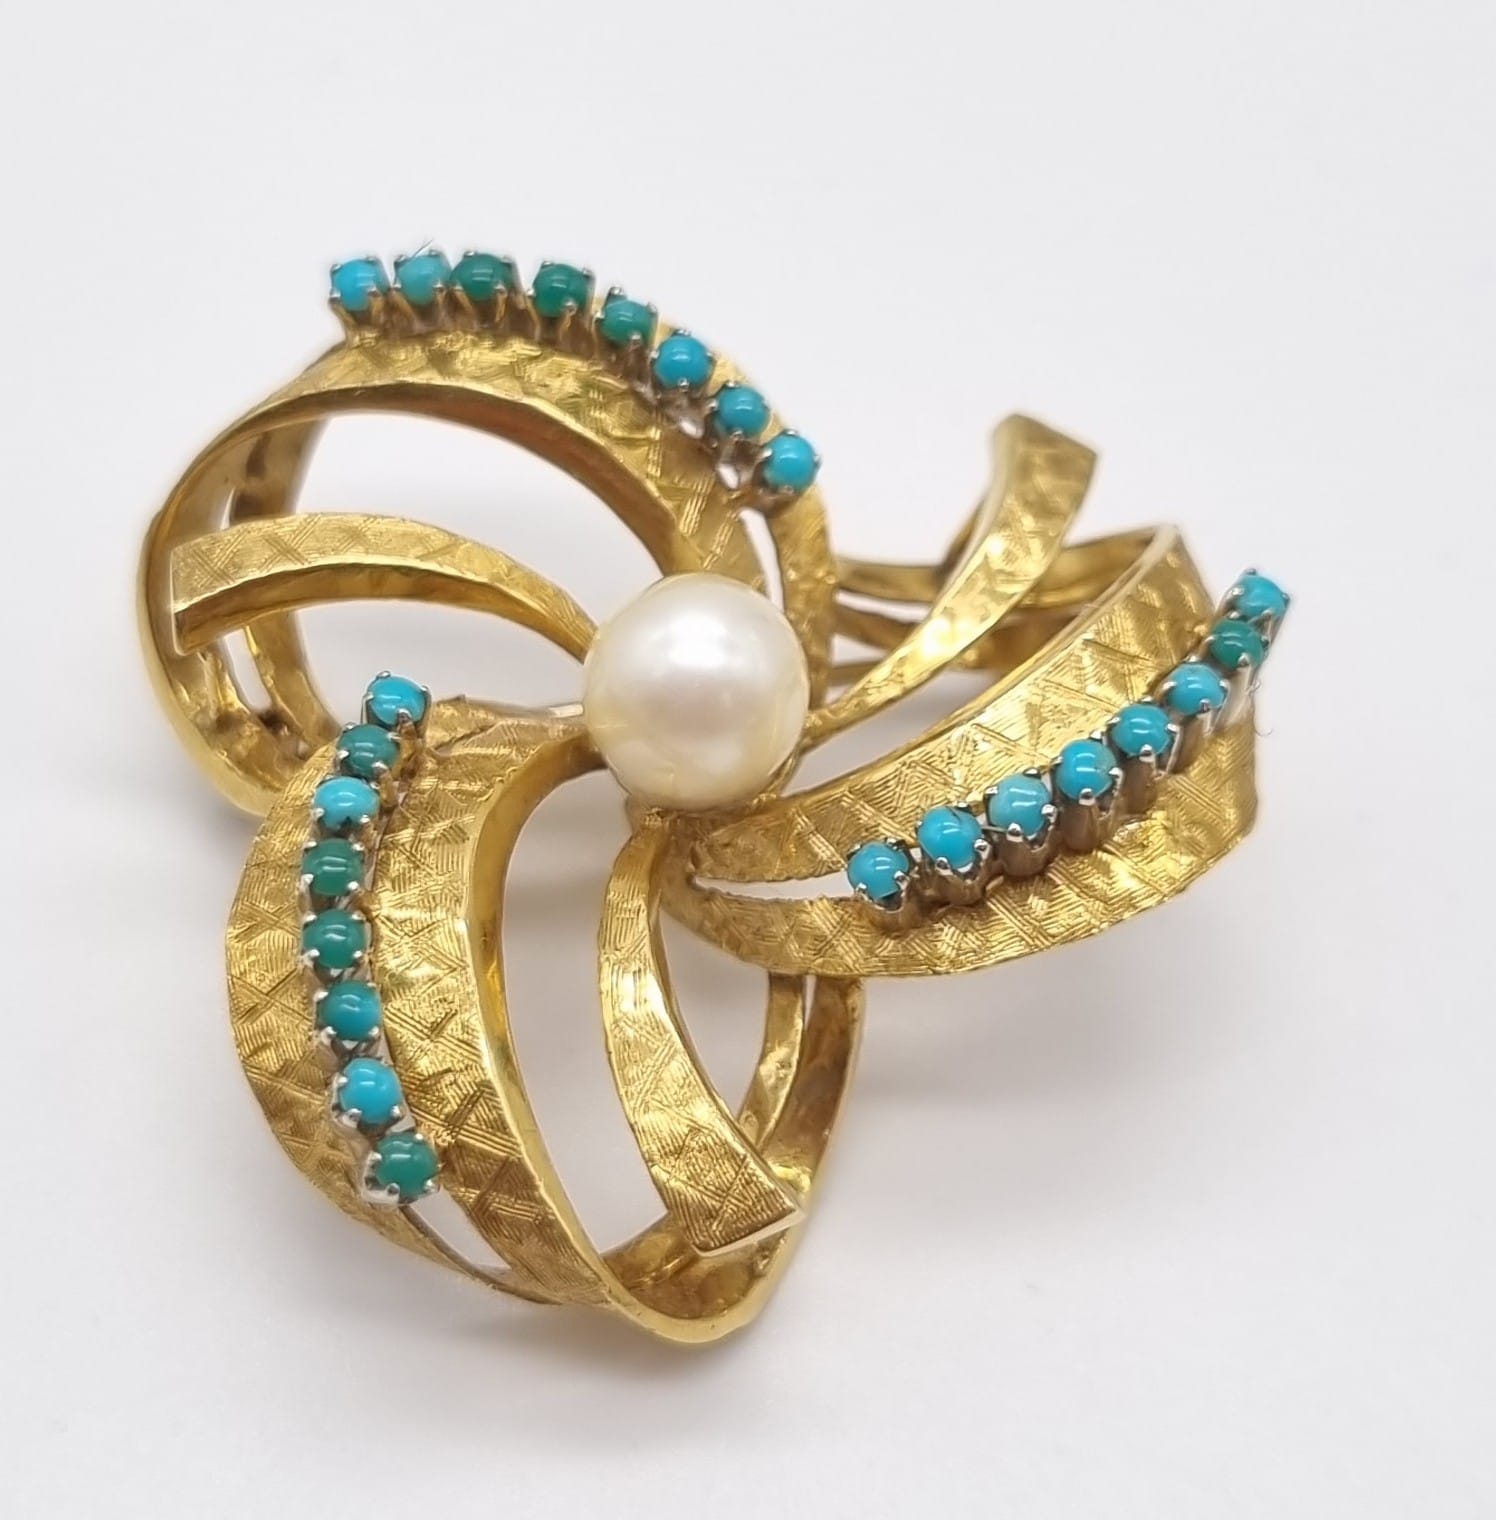 A Wonderful Vintage Possibly Antique 18K Yellow Gold, Turquoise and Pearl Ring/Brooch Set. Ring - - Image 11 of 13